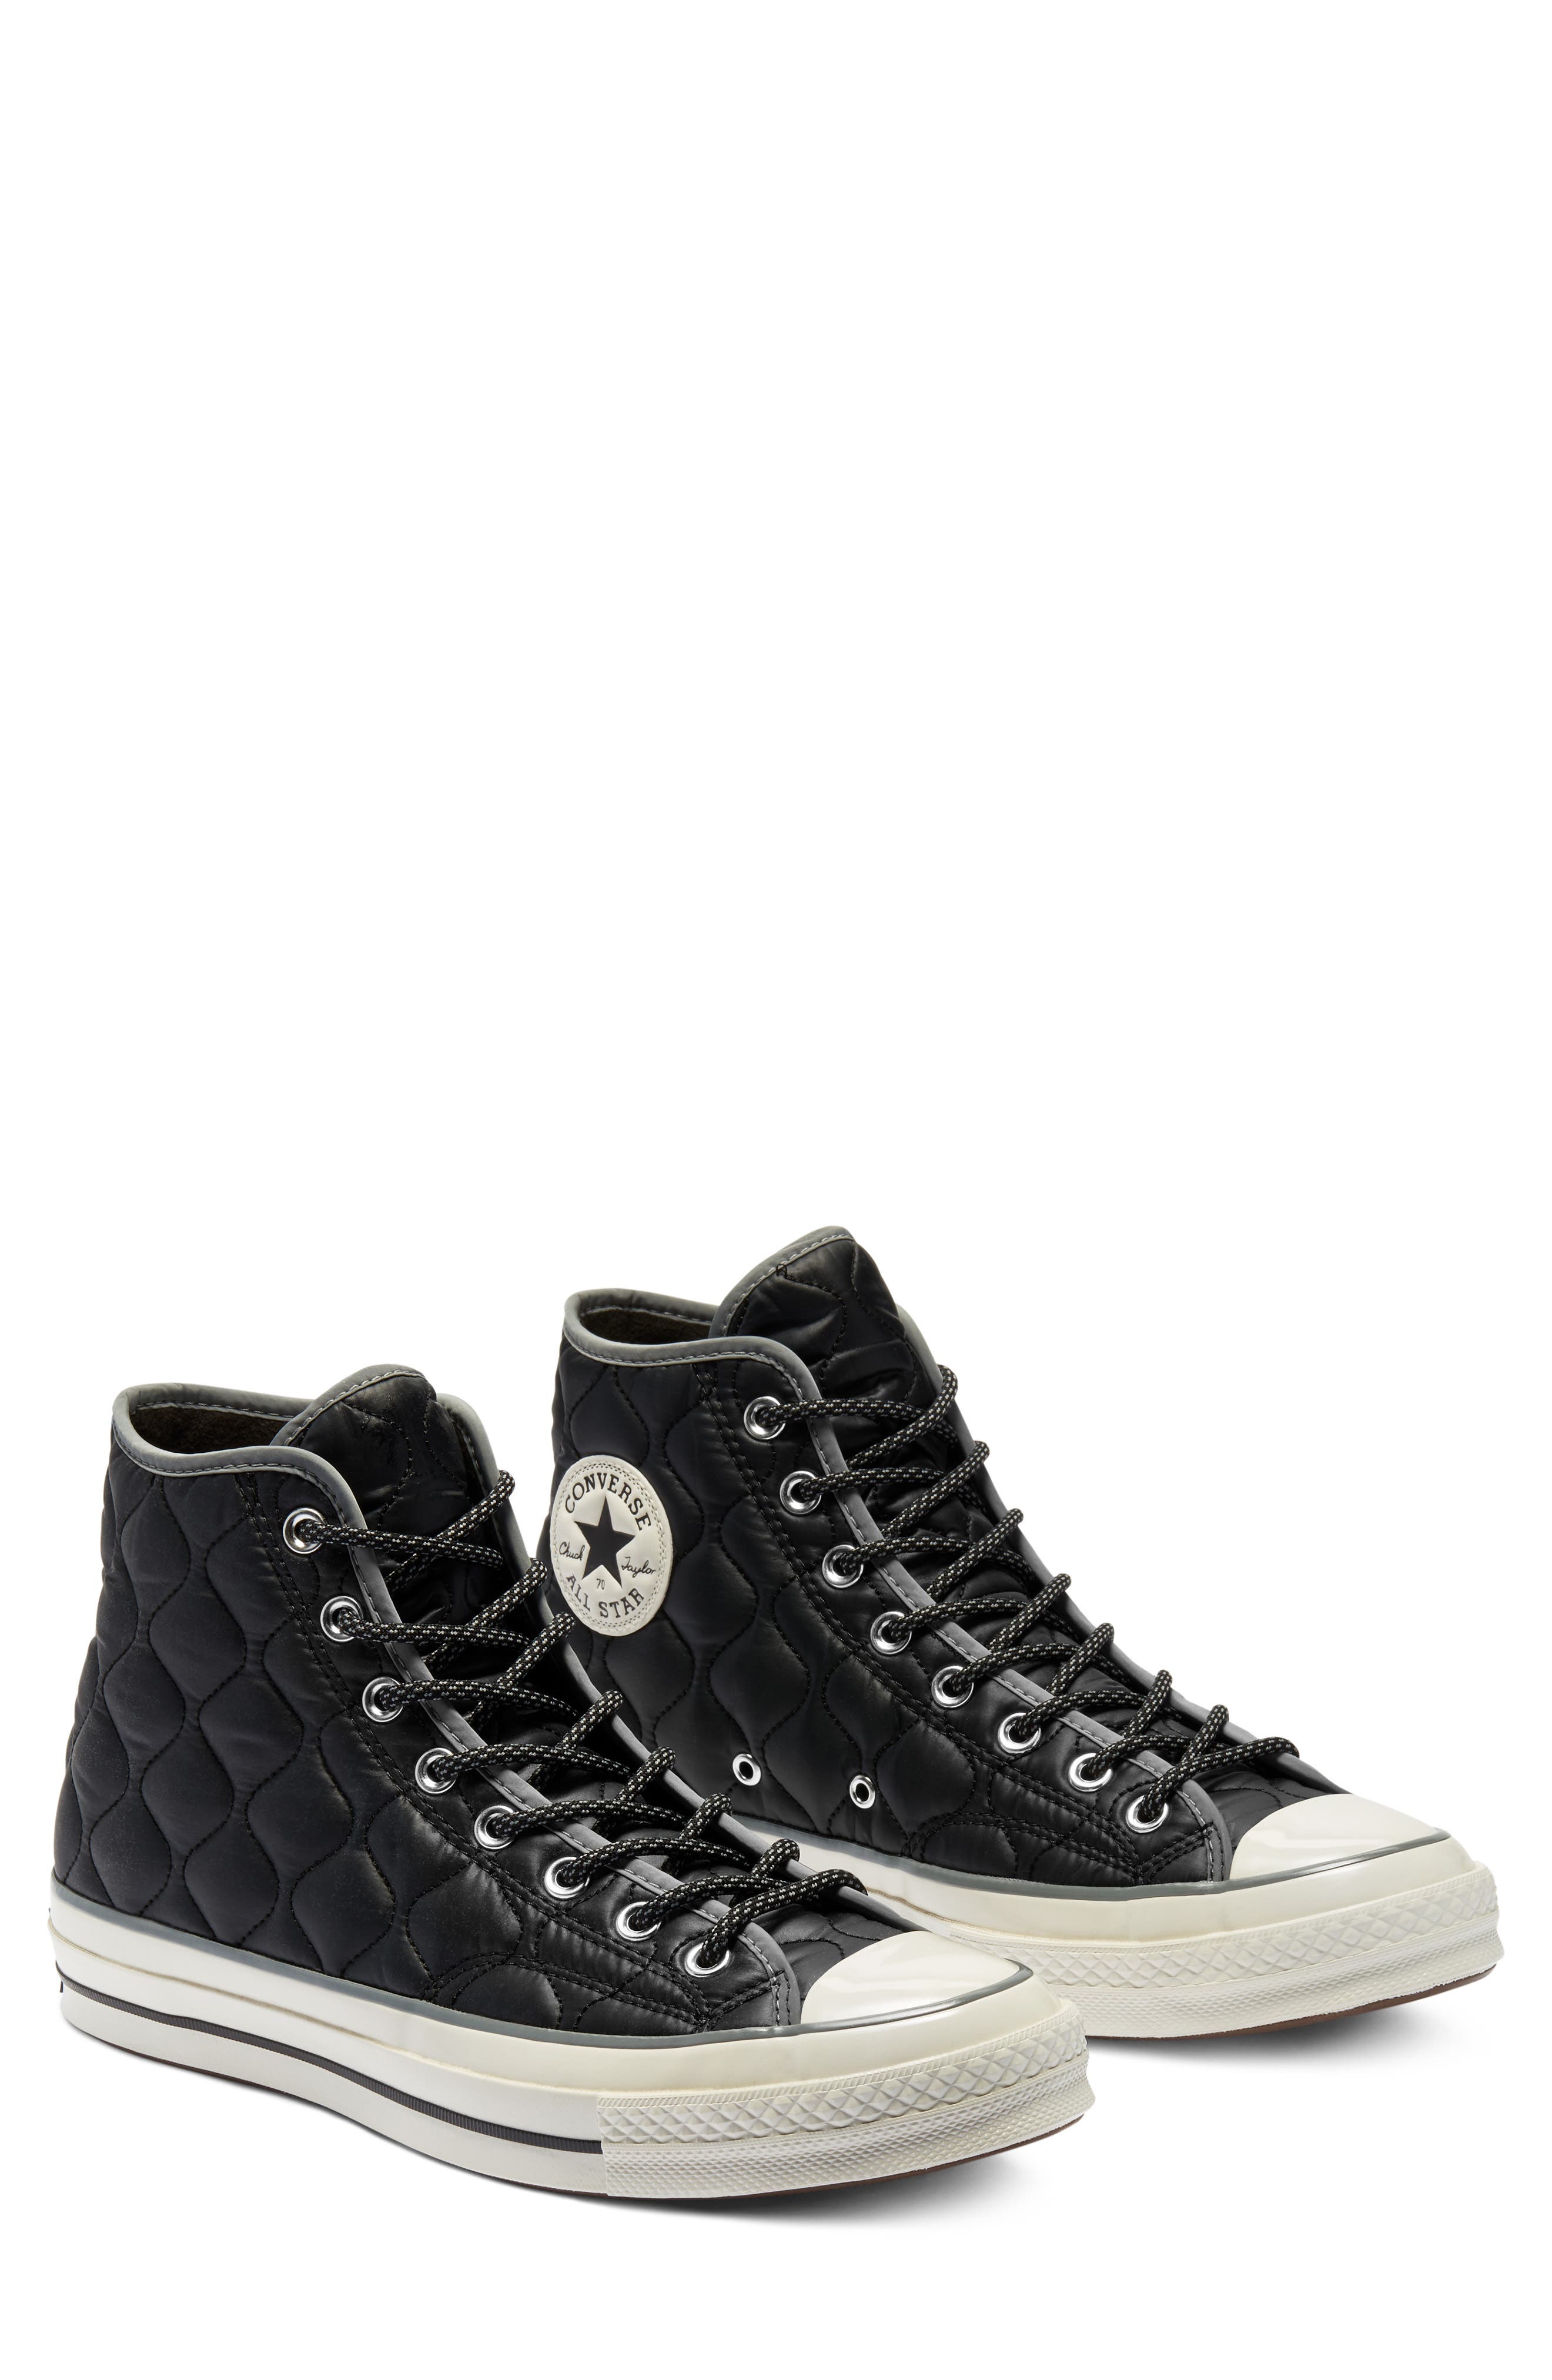 converse black gold quilted